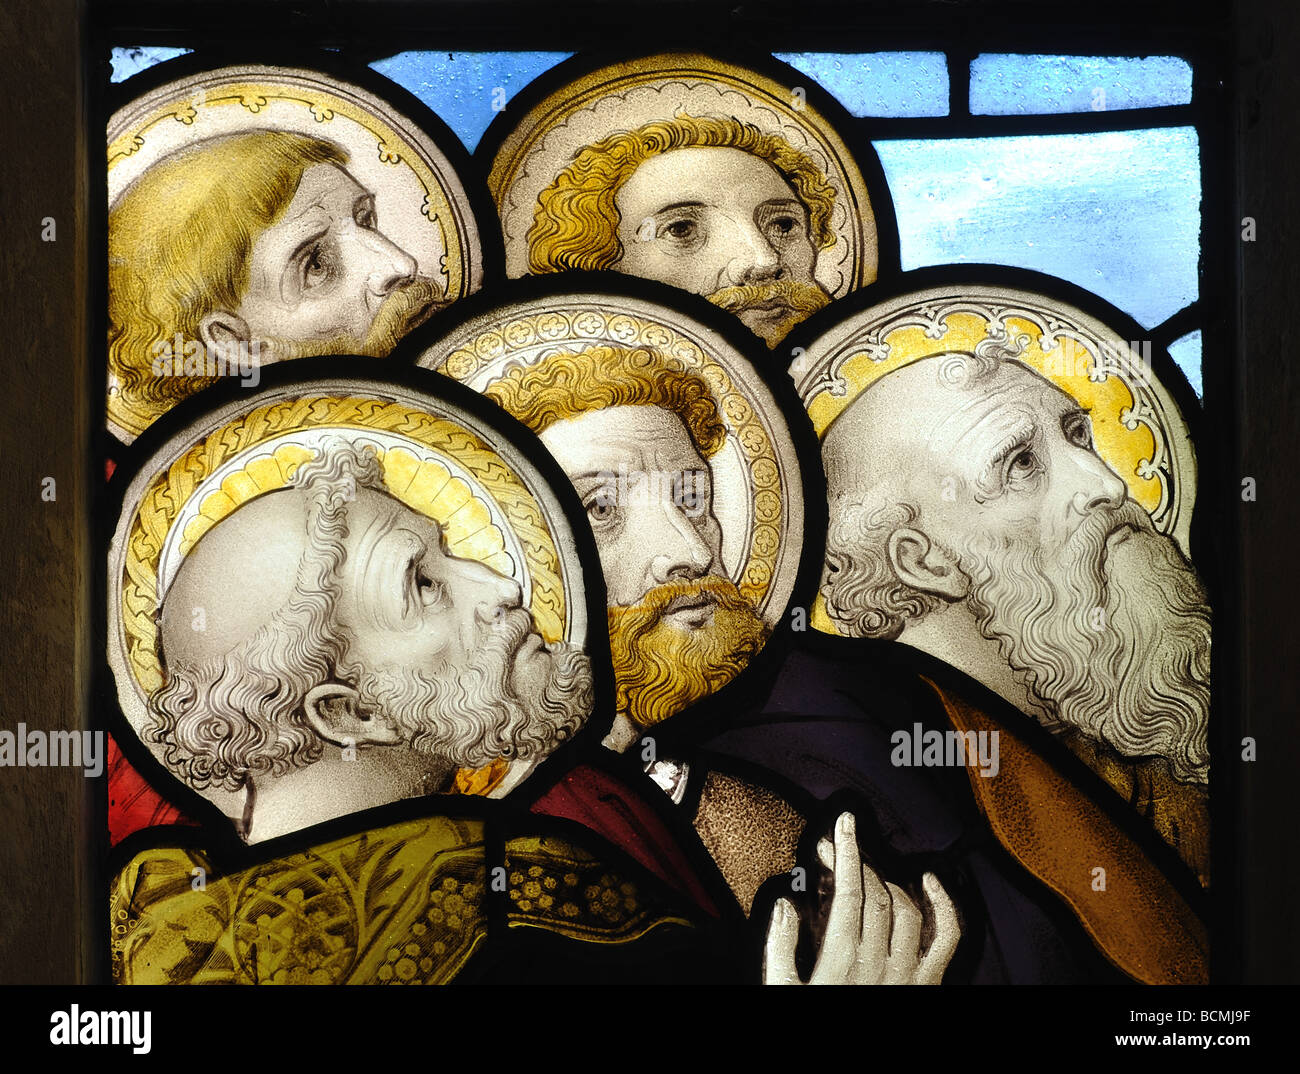 Christ`s disciples stained glass, St. Mary the Virgin Church, Culworth, Northamptonshire, England, UK Stock Photo